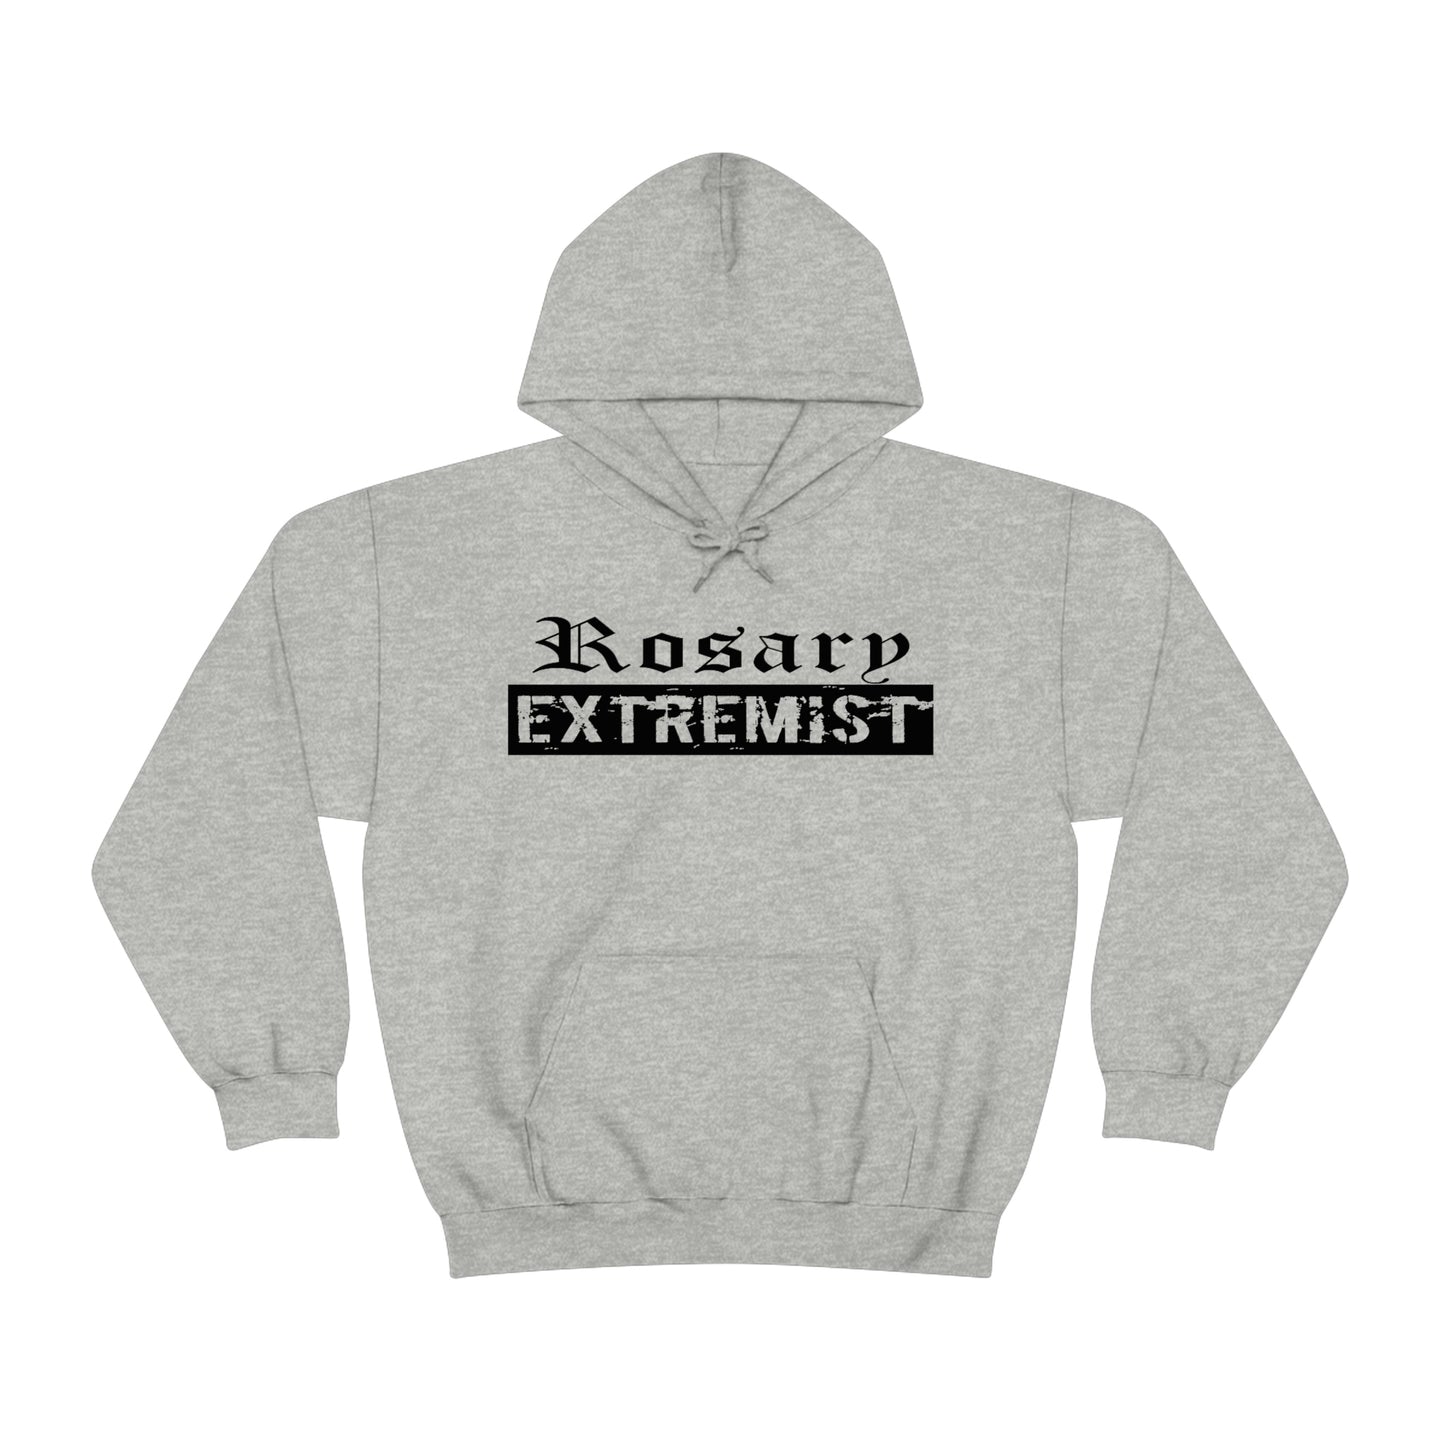 Heather Gray Gildan Hoodie with black "Rosary Extremist" text printed on it by Sanctus Servo.